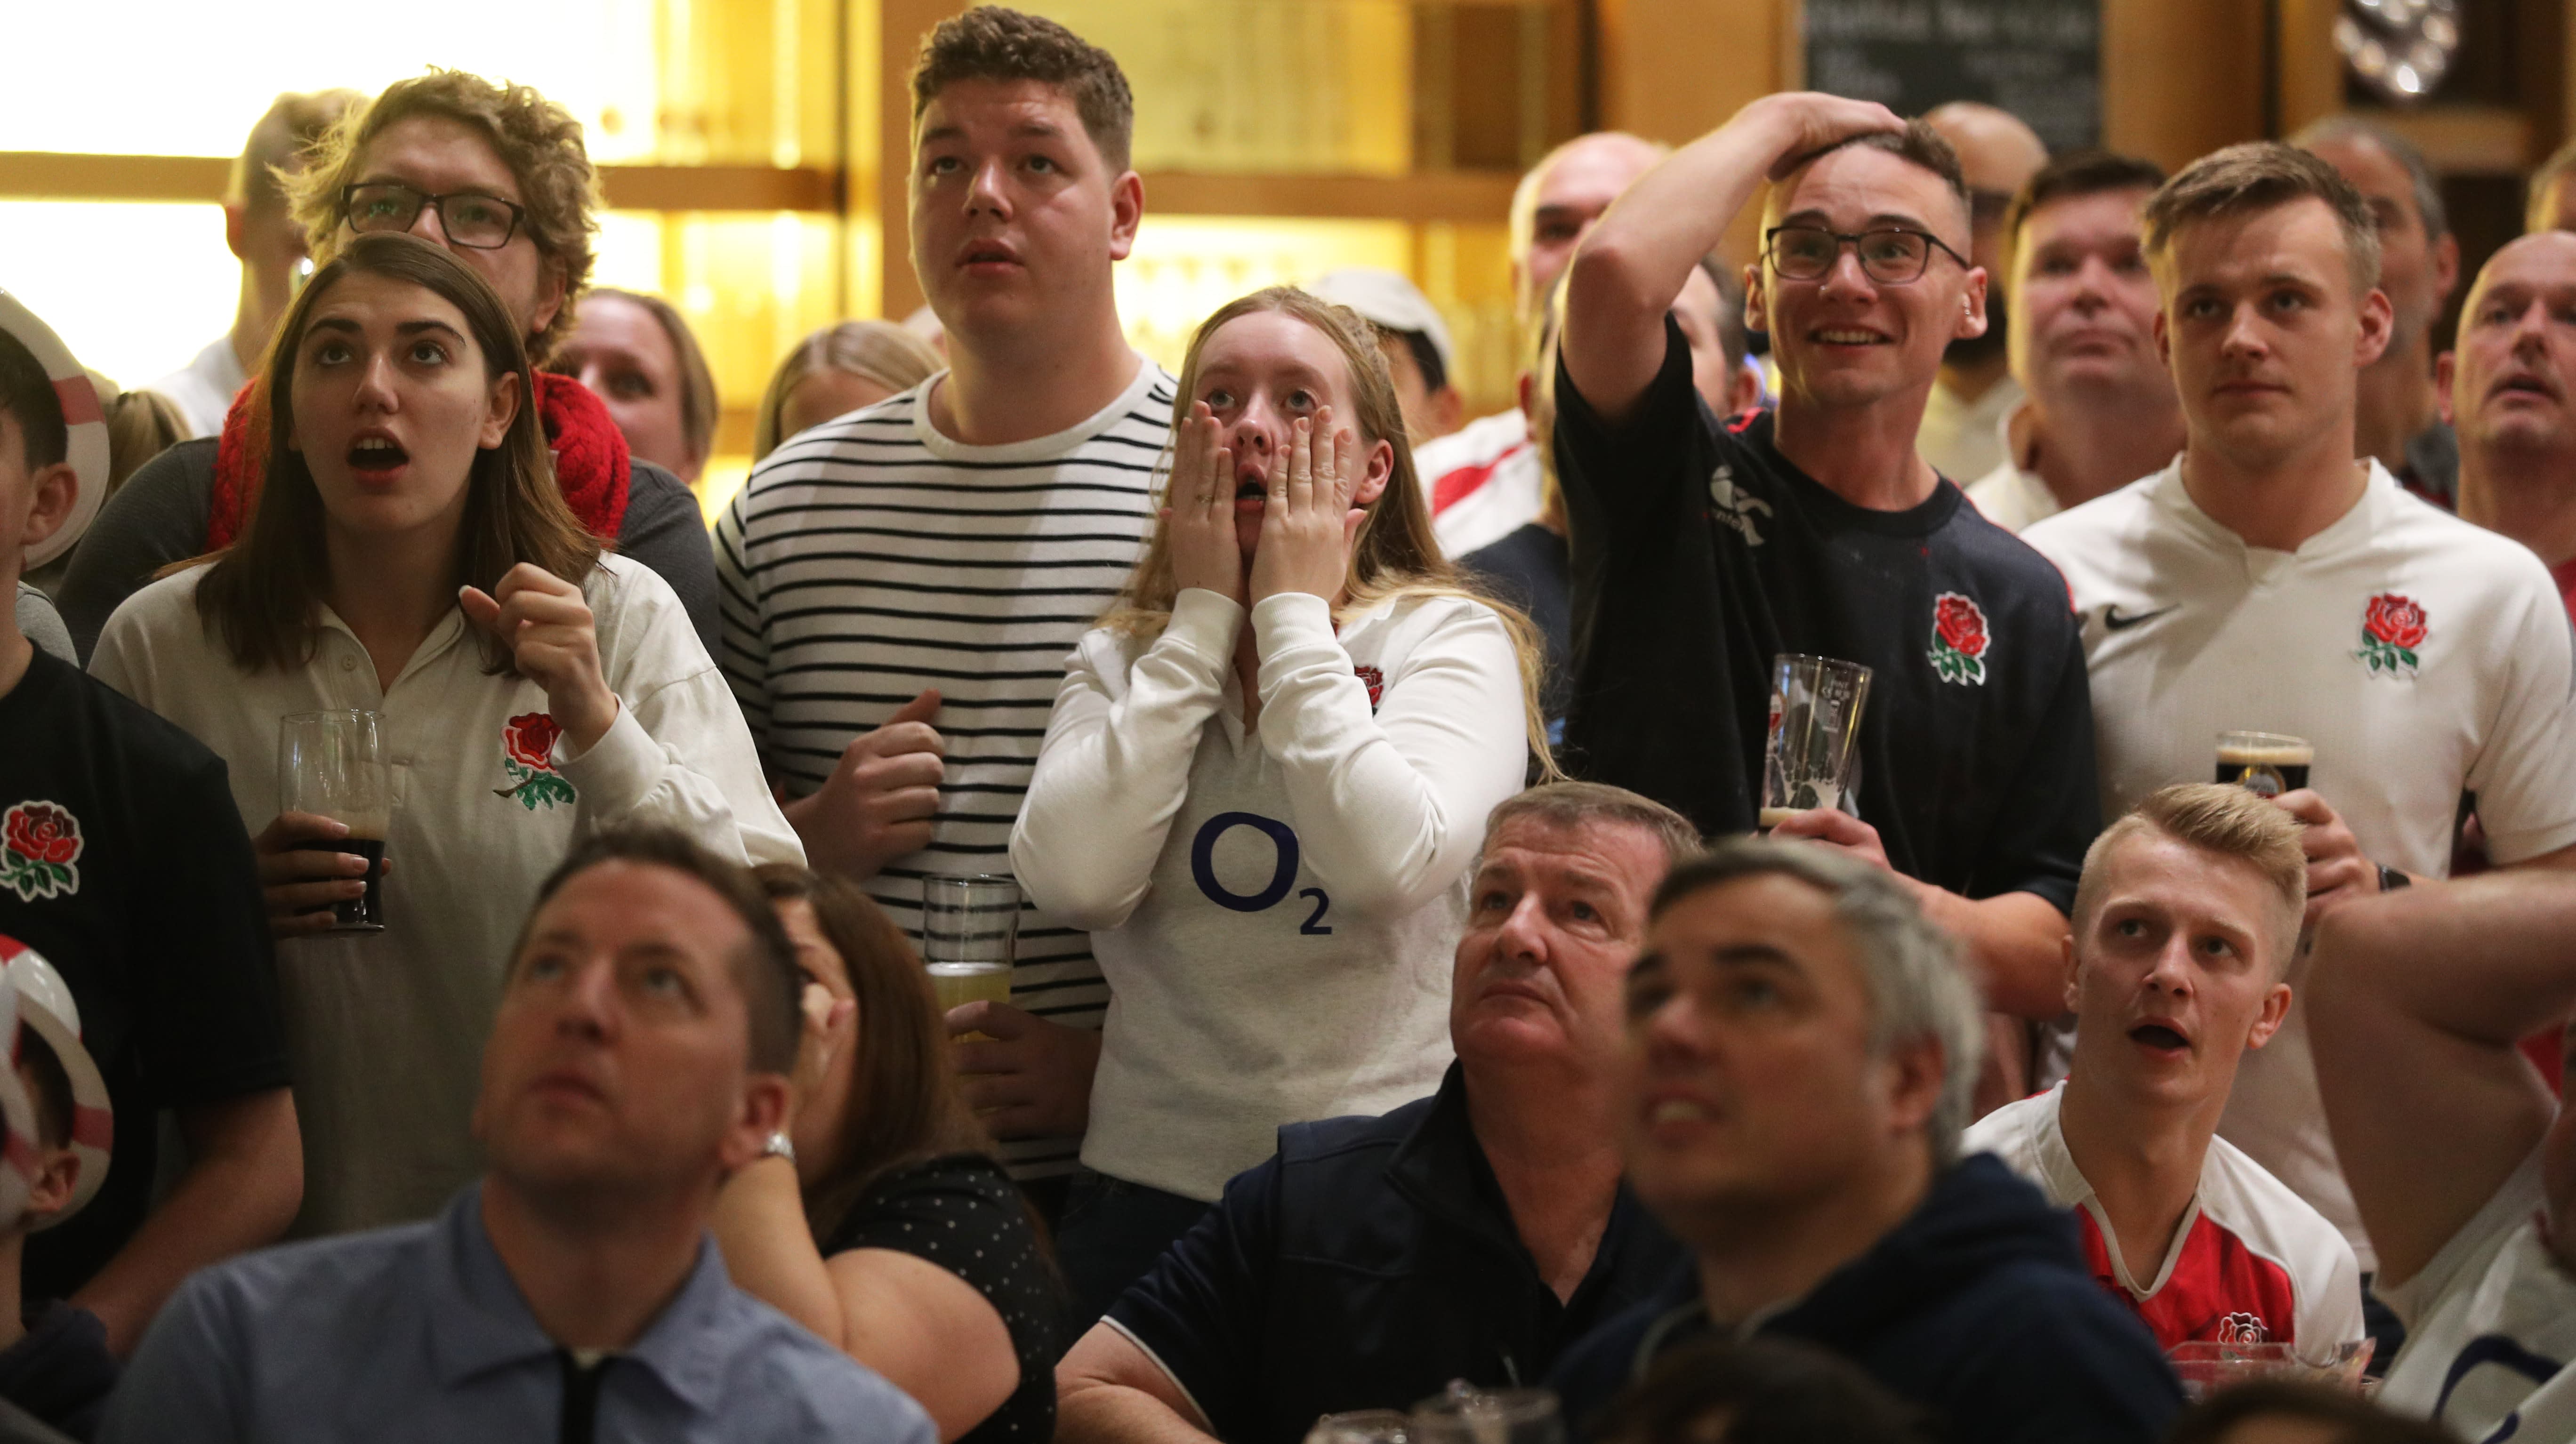 England rugby fans  on edge of their seats for South Africa 